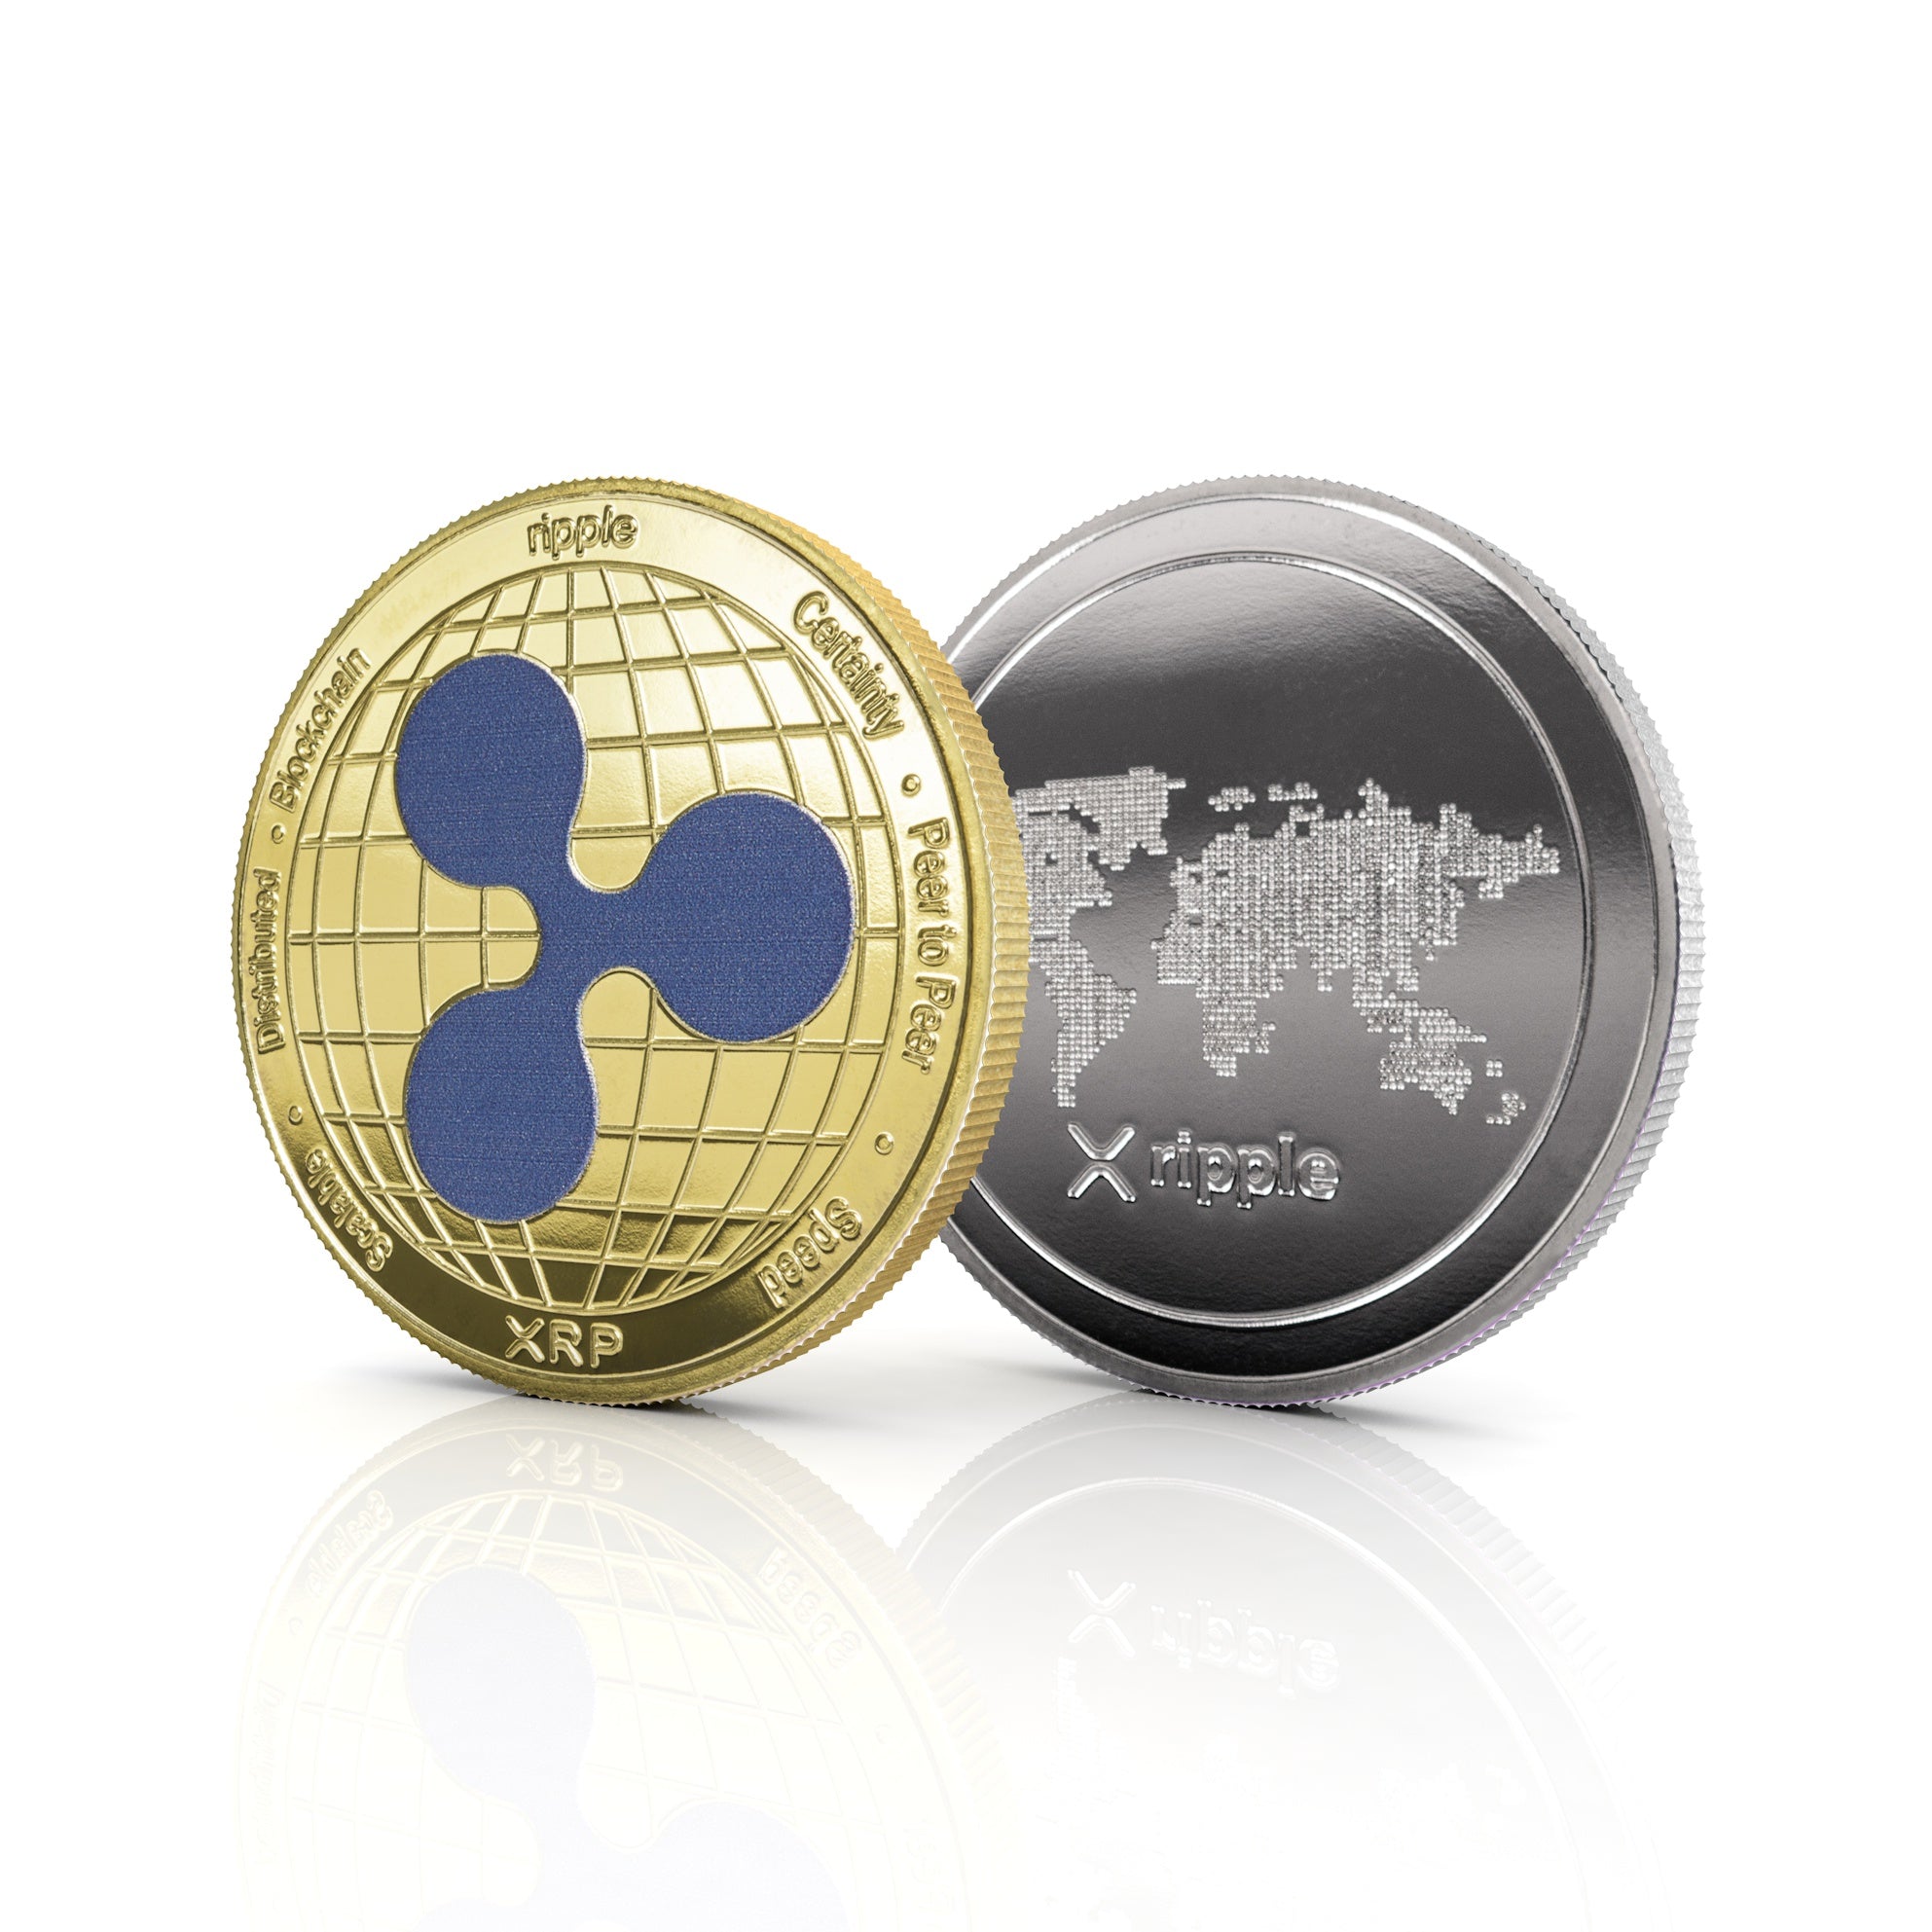 Cryptochips | Ripple Physical Crypto Coin. Collectable cryptocurrency merch you can hodl